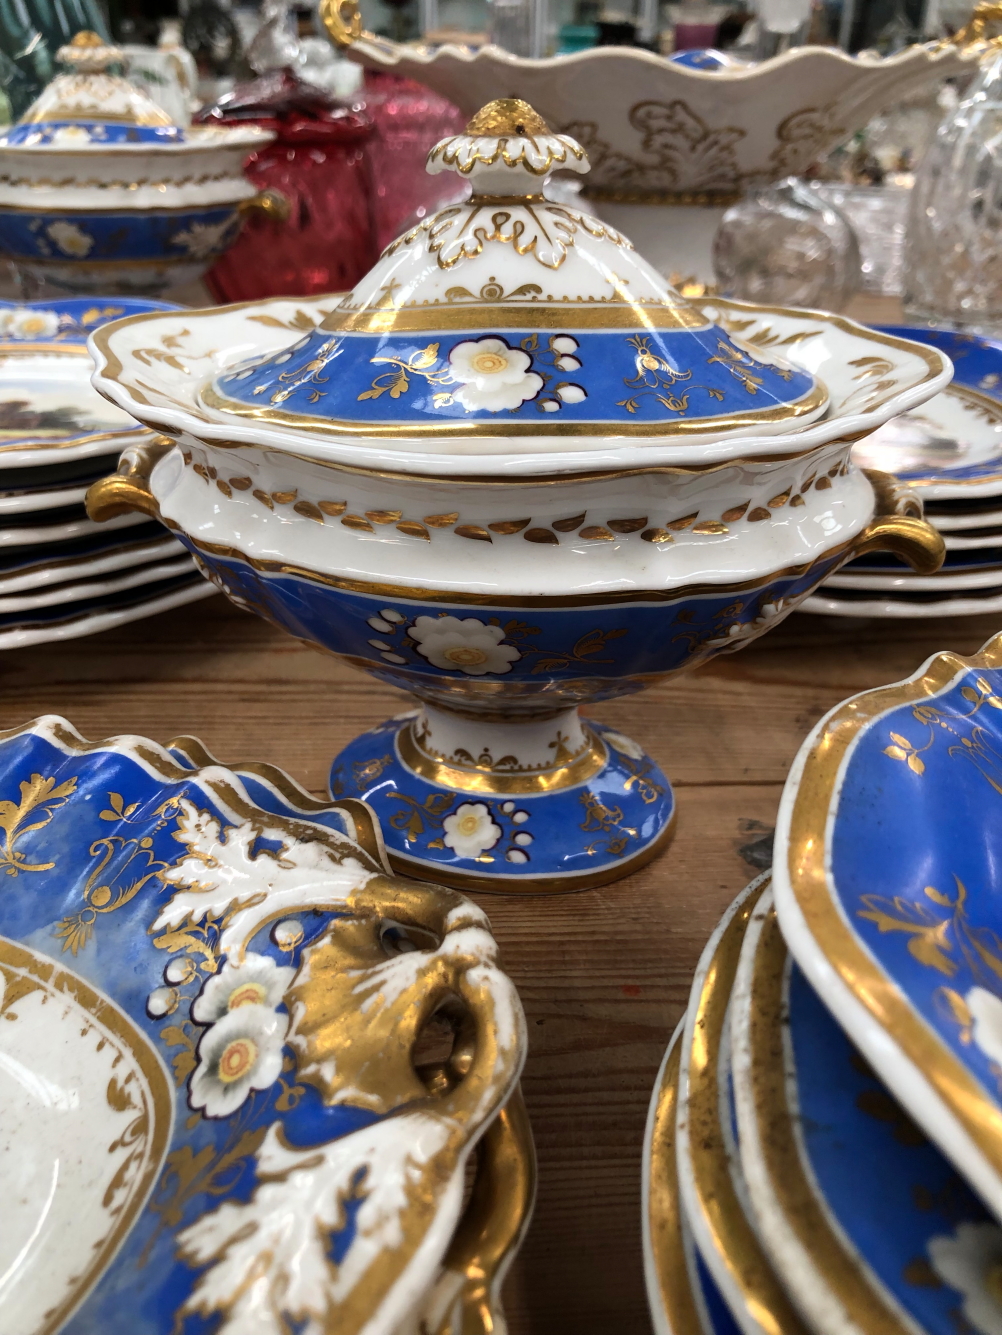 A 19th C. ENGLISH PORCELAIN DESSERT SERVICE PAINTED WITH LANDSCAPES WITHIN GILT BLUE BANDS - Image 10 of 27